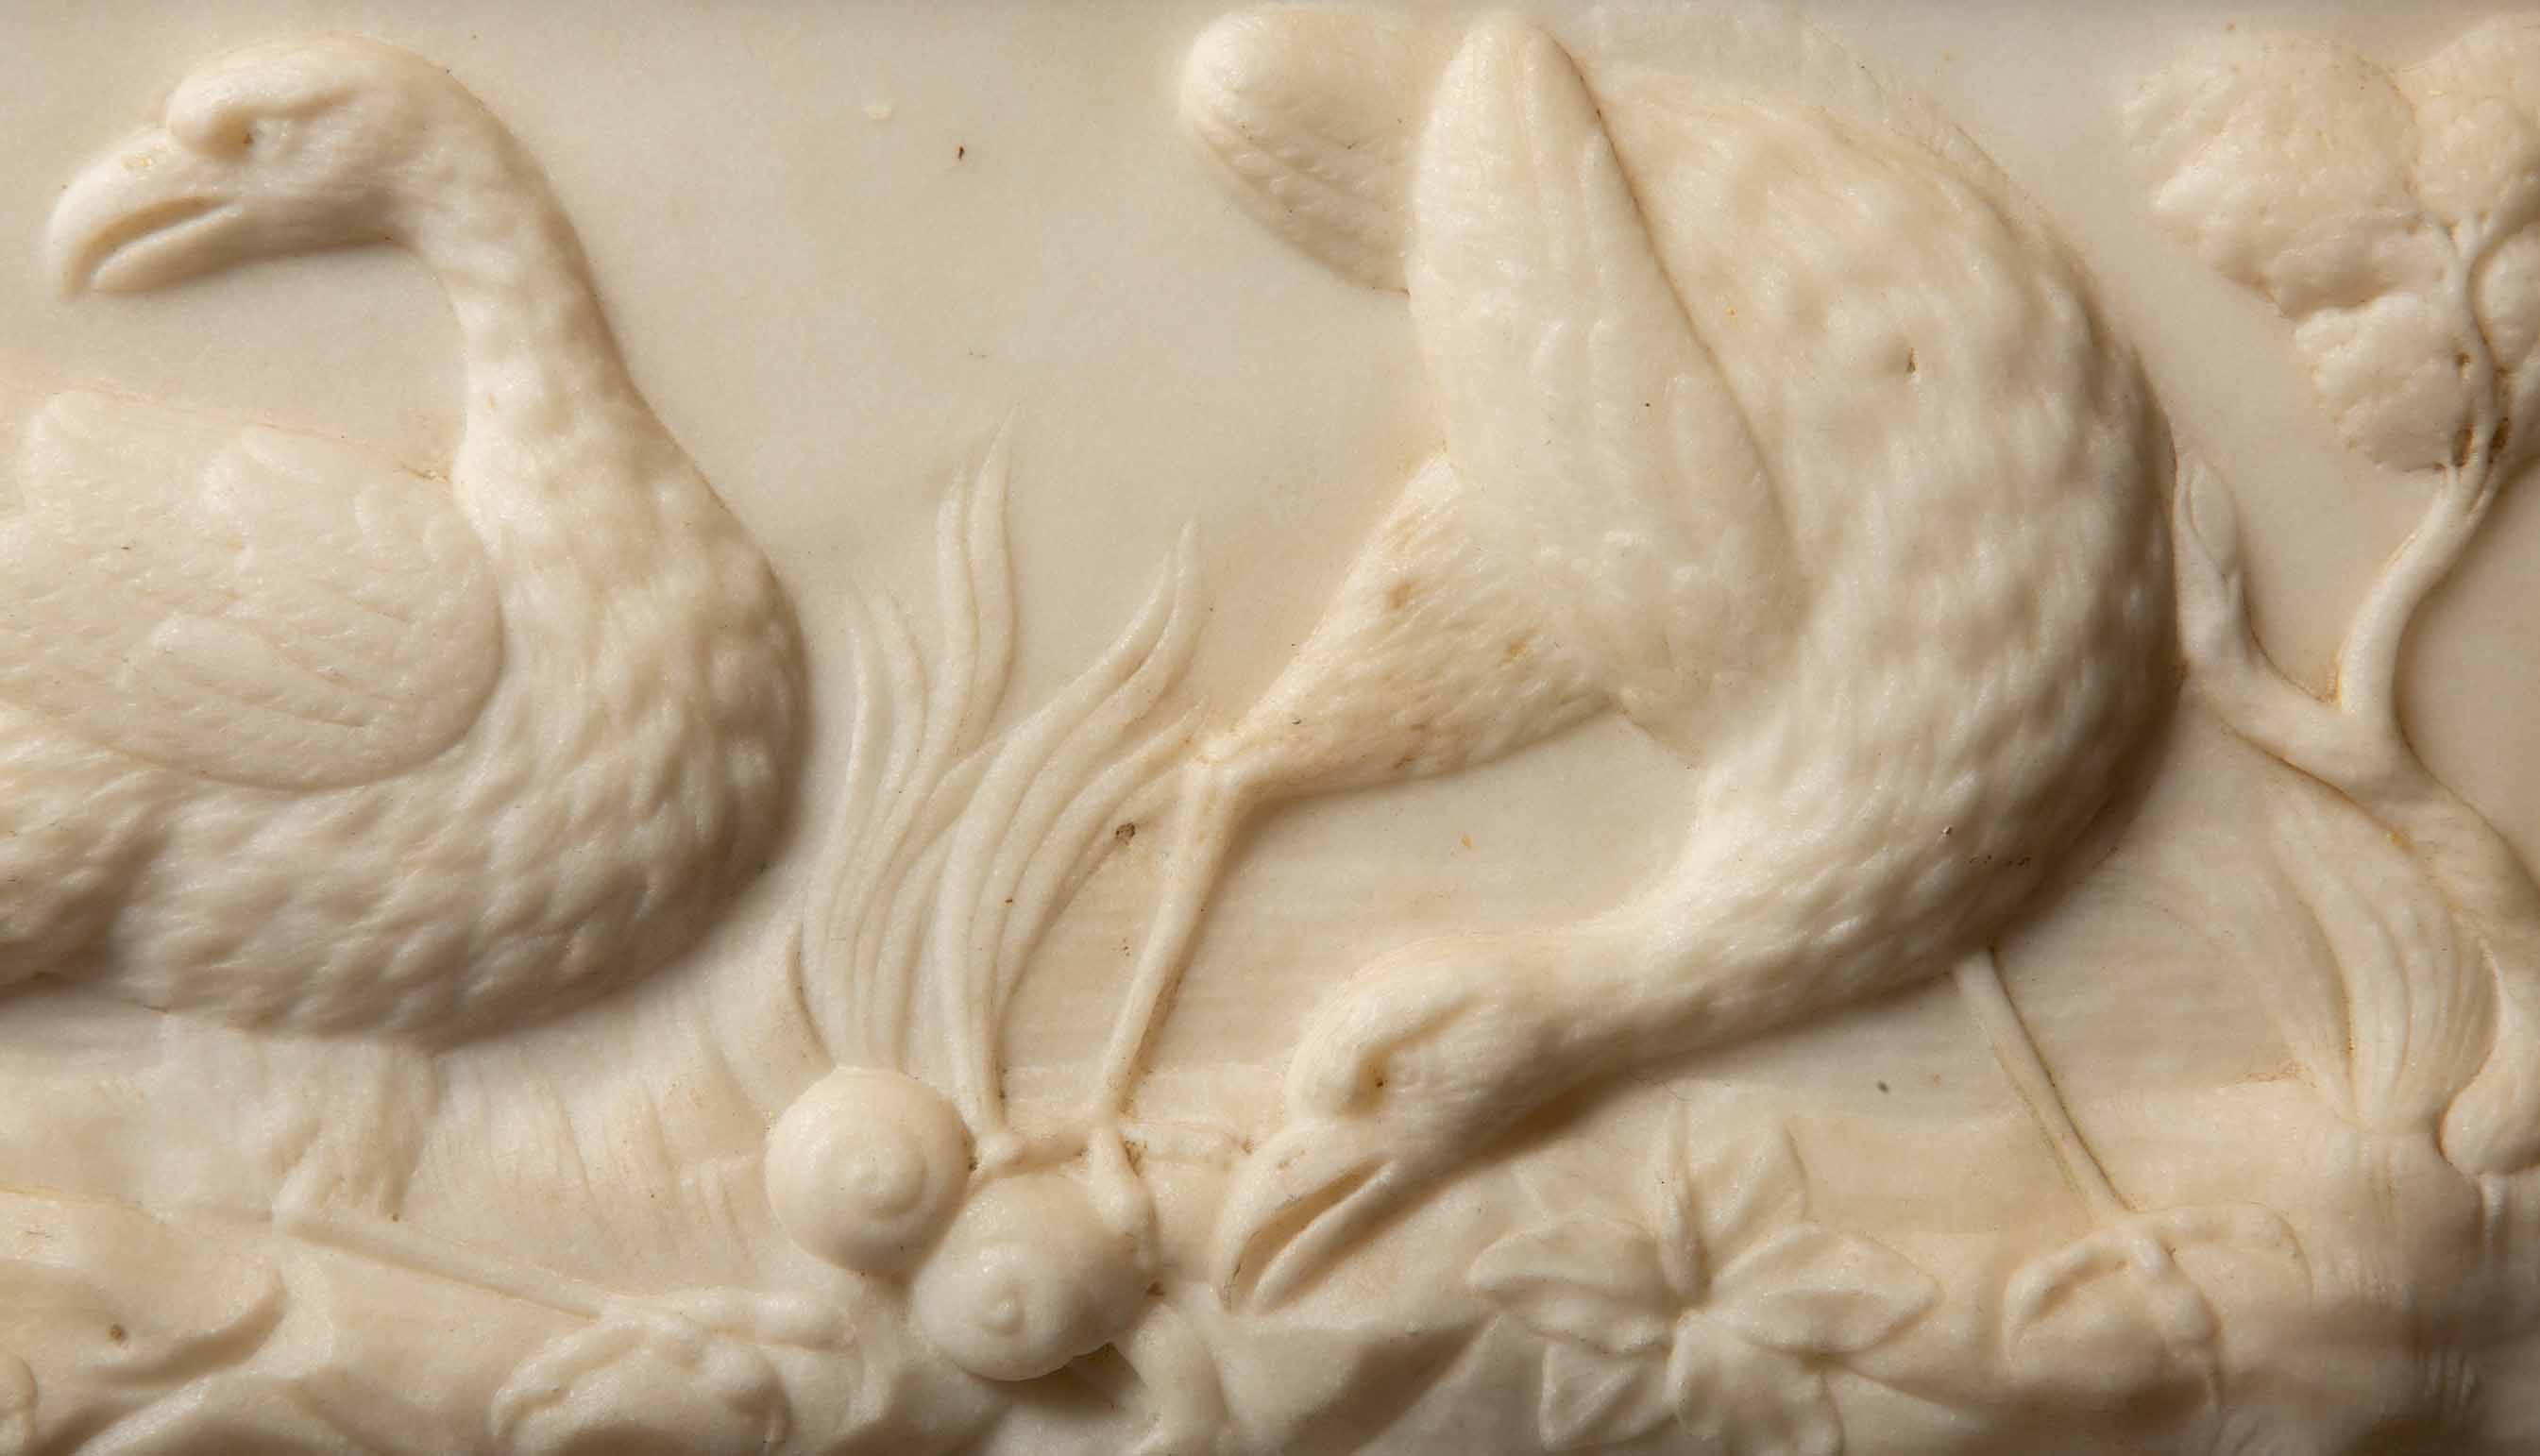 19th-Century Italian Marble Relief: Majestic Bustards in Exquisite Detail